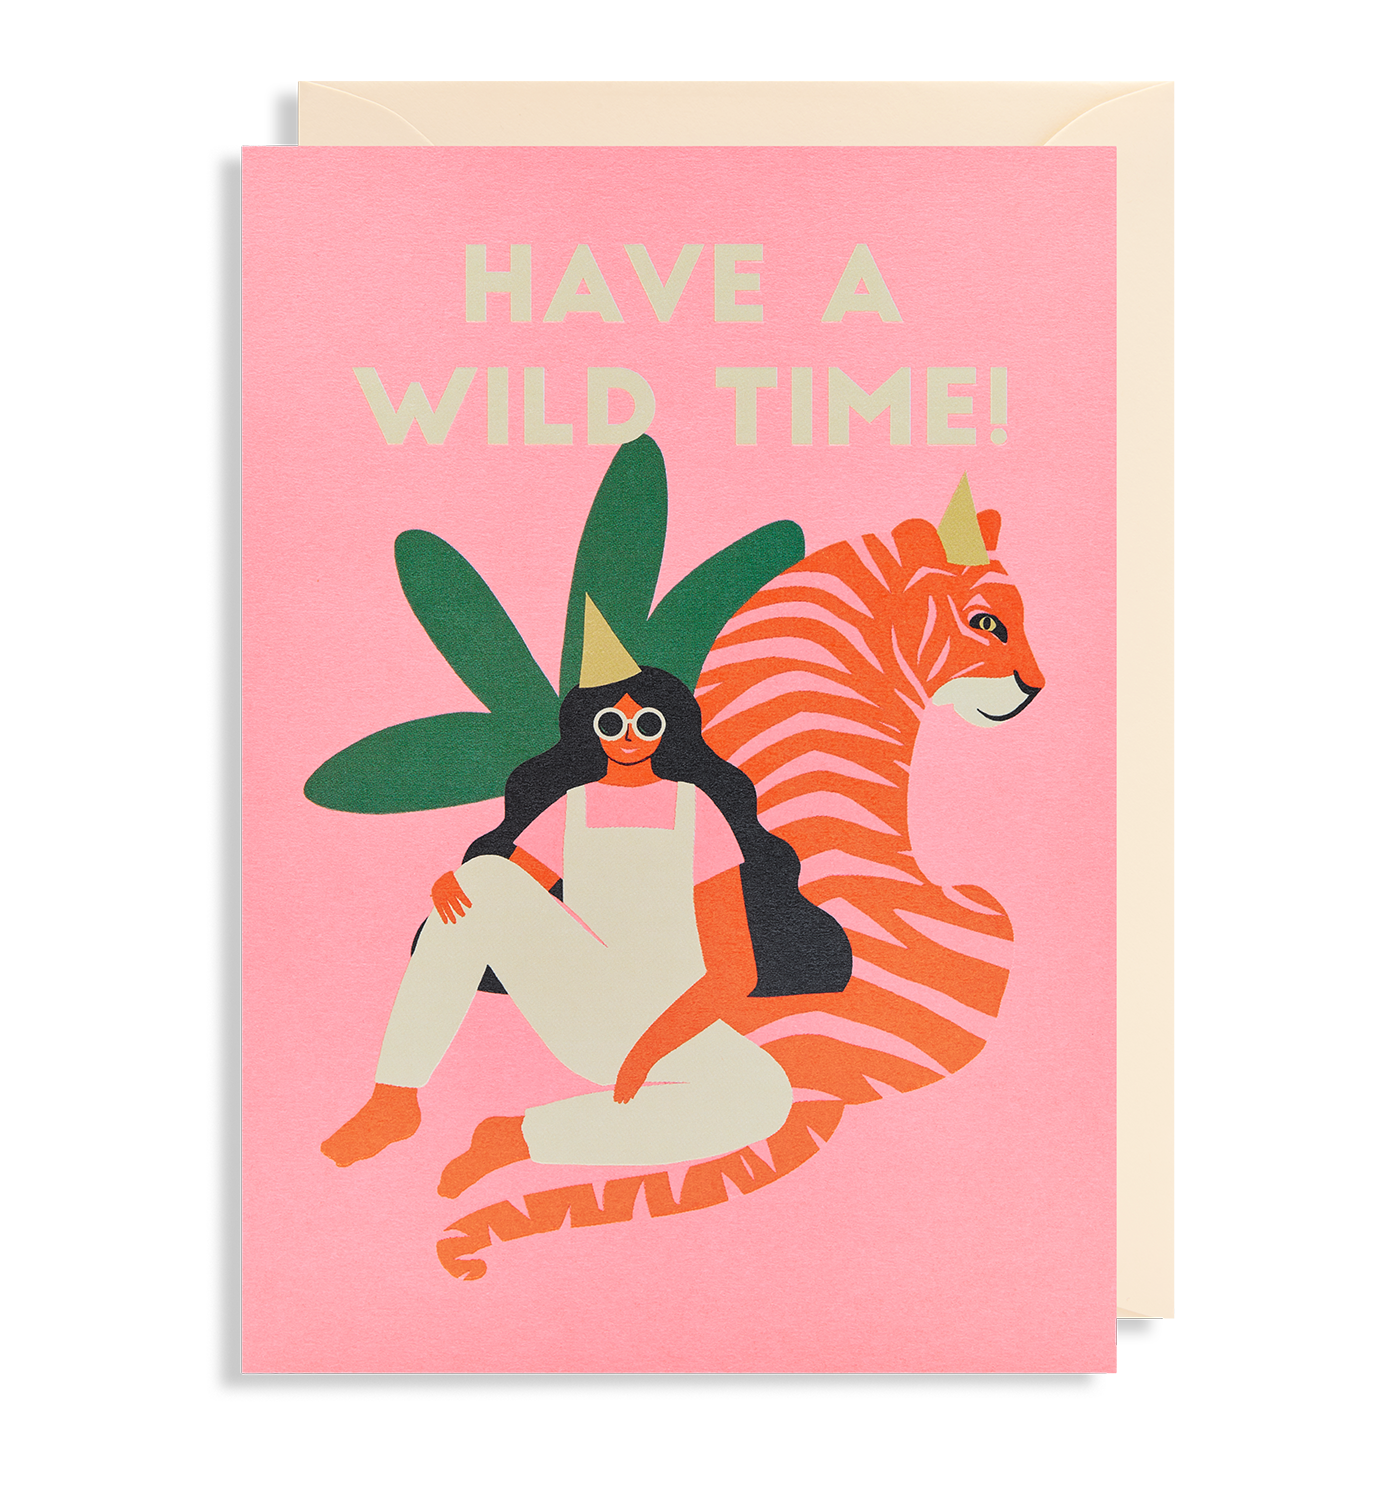 Naomi Wilkinson pink greetings card featuring illustration of a female in dungarees and a party hat sitting next to a tiger and the words 'Have A Wild Time!'.